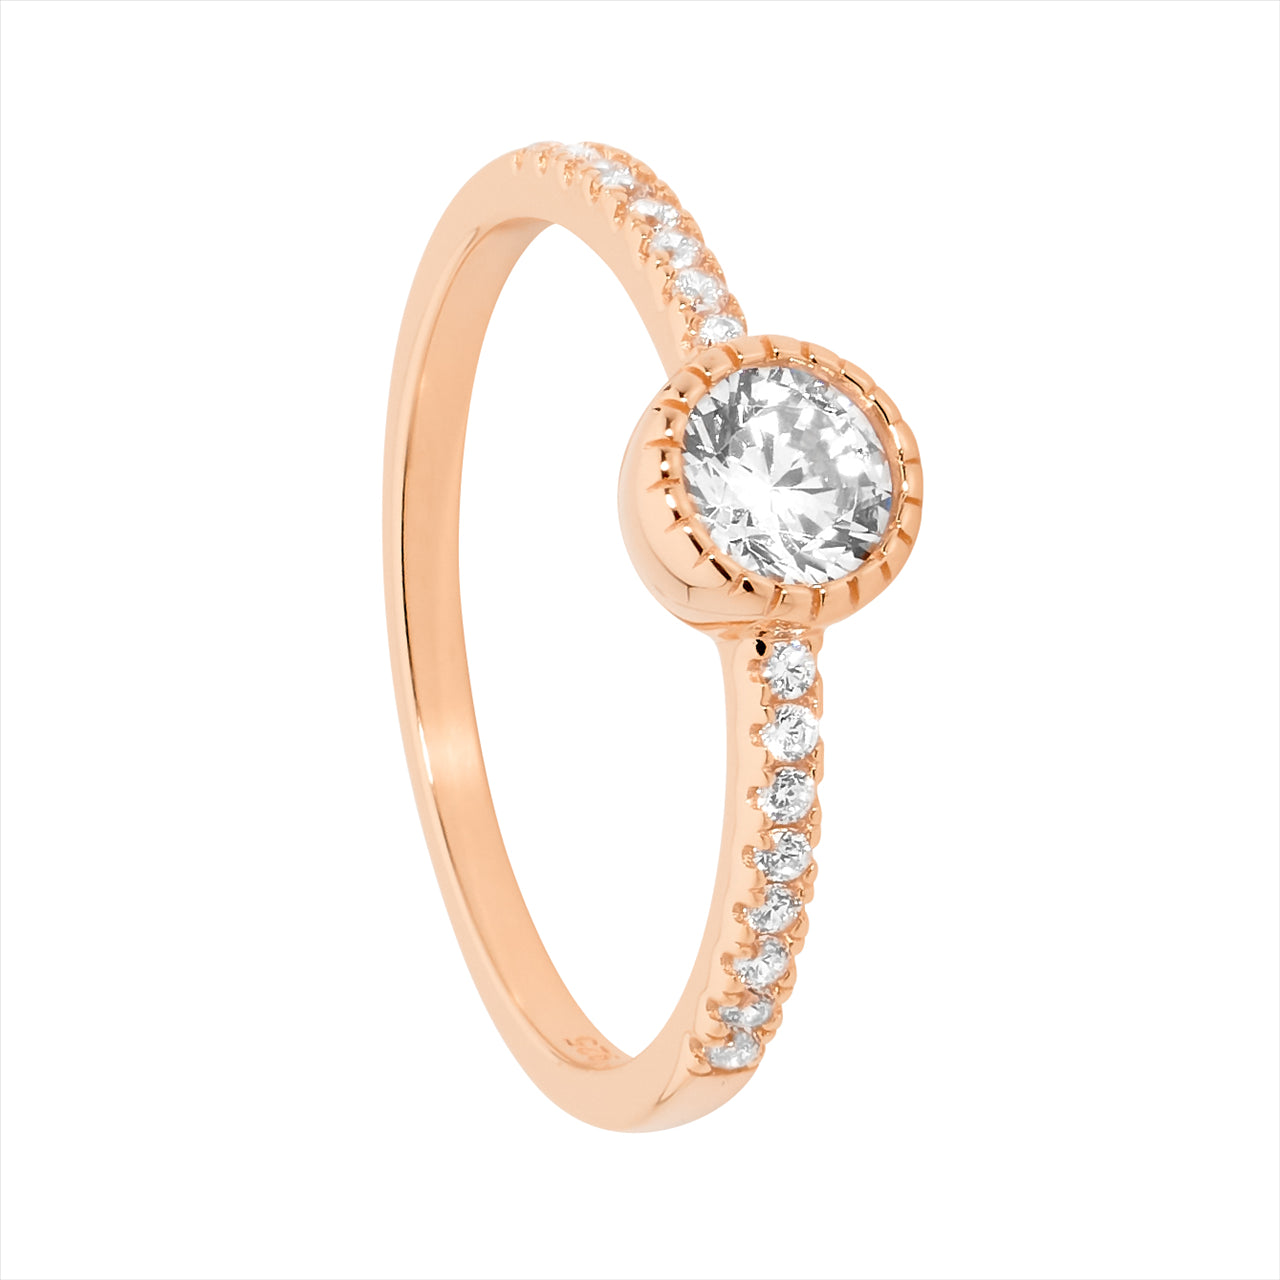 Ring - Sterling silver/Rose gold plated with White Cubic Zirconia